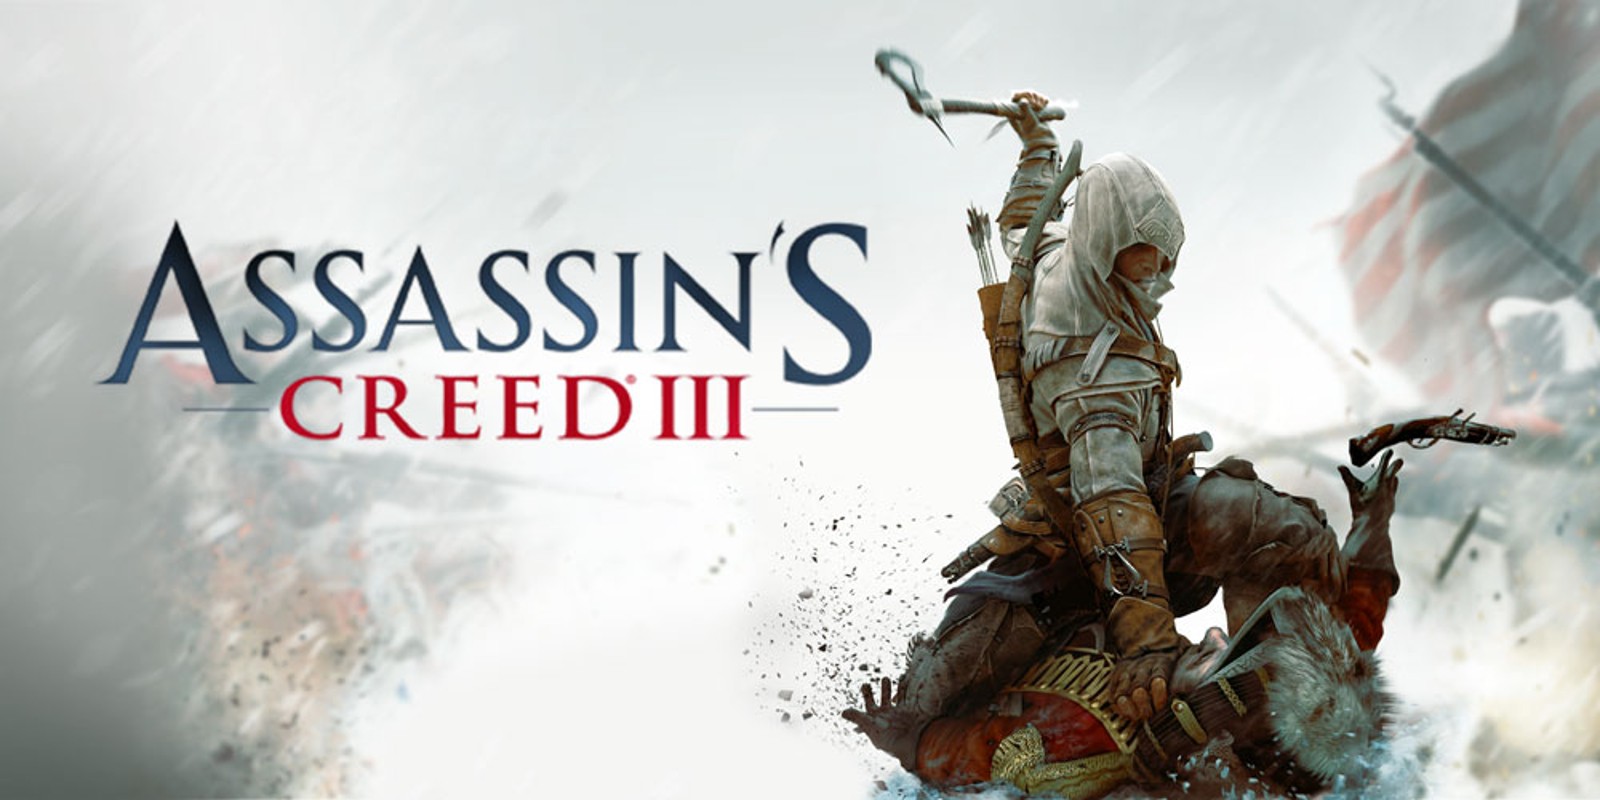 Assassin's Creed III Remaster is past of the Odyssey Season Pass